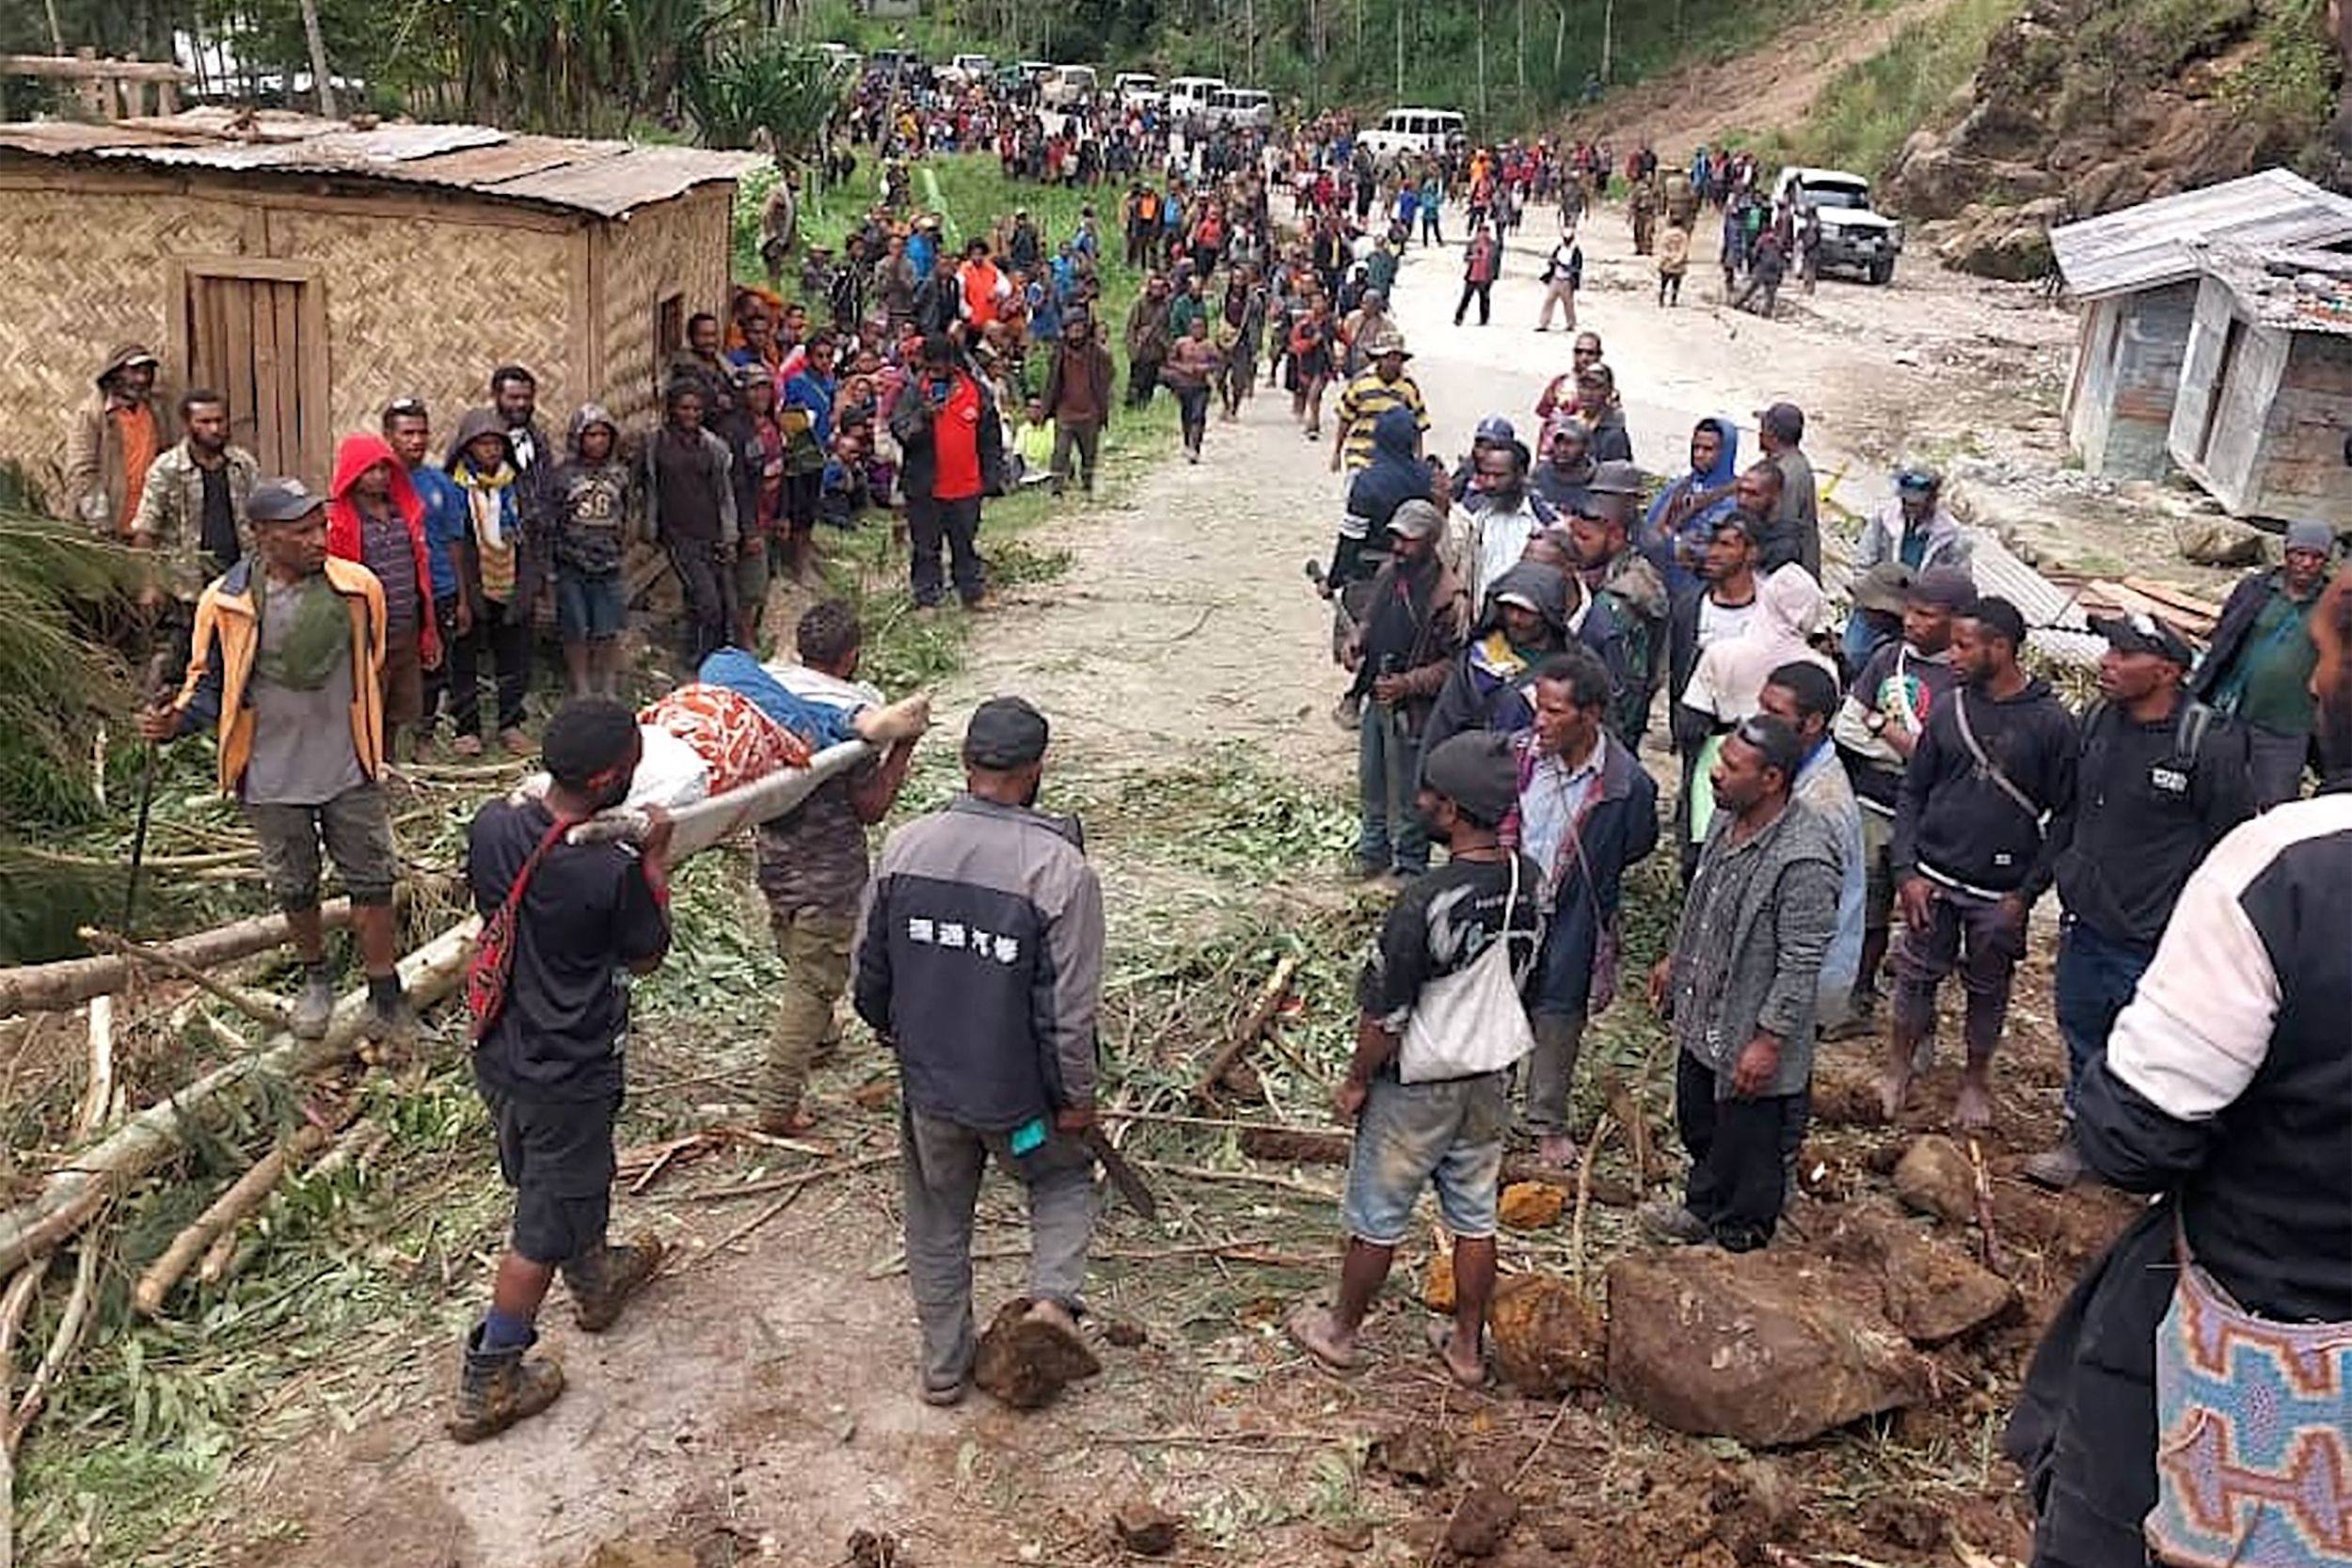 Locals carry a person on a stretcher from the site of a landslide at Yambali village in Papua New Guinea’s Enga province on May 25. Photo: IOM/AFP